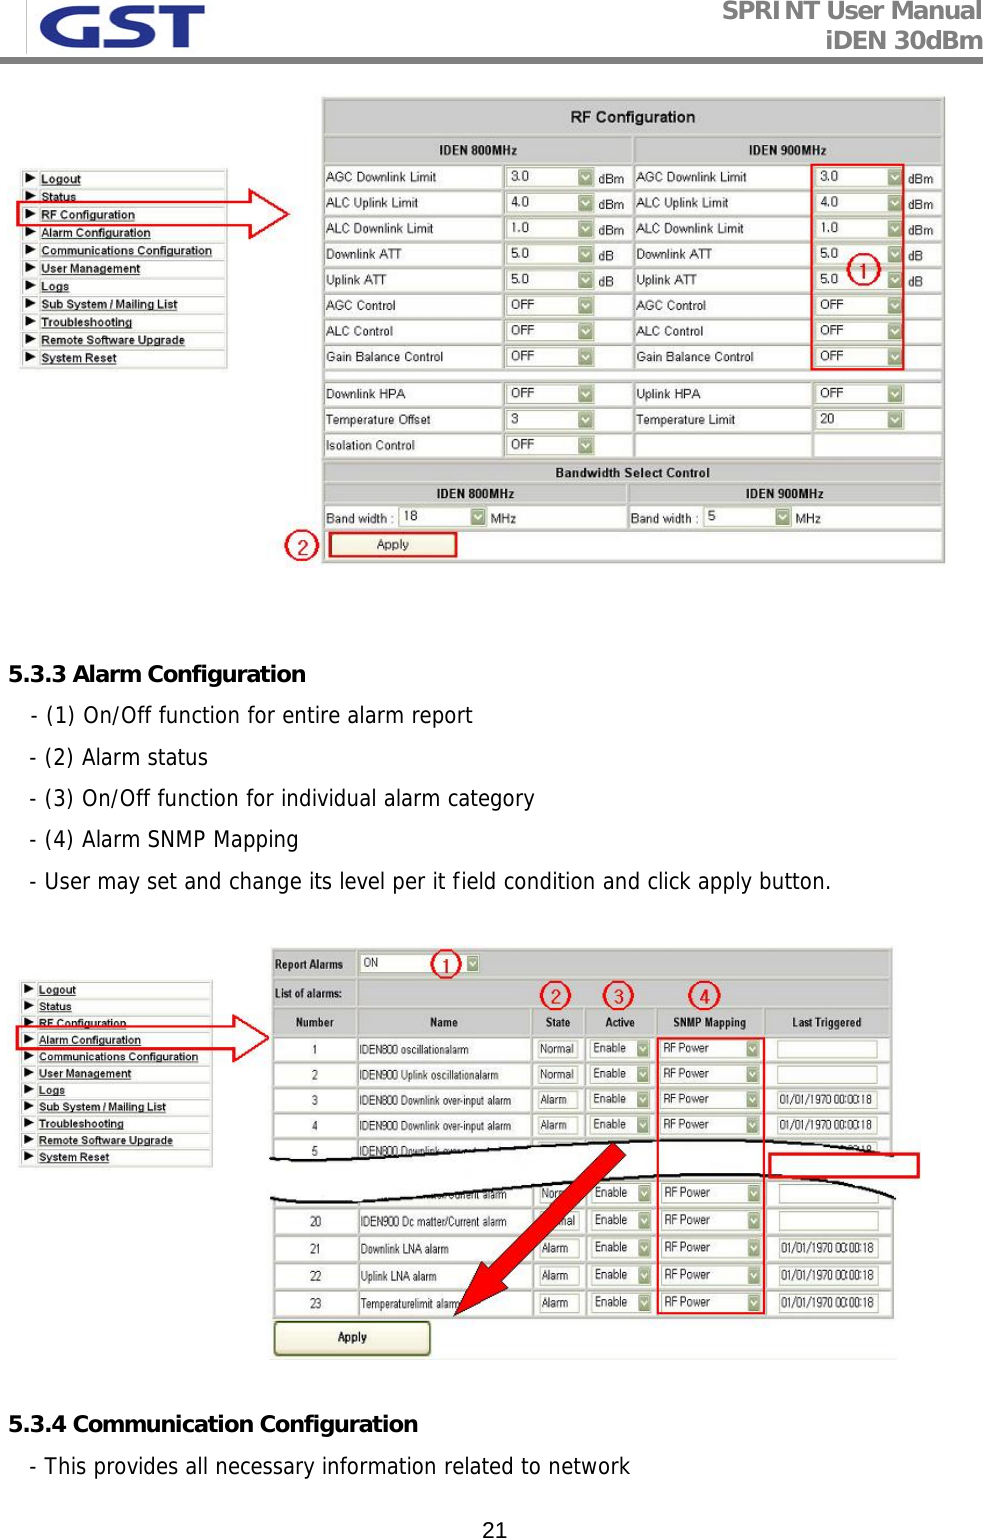 SPRINT User Manual iDEN 30dBm   21   5.3.3 Alarm Configuration - (1) On/Off function for entire alarm report     - (2) Alarm status    - (3) On/Off function for individual alarm category    - (4) Alarm SNMP Mapping    - User may set and change its level per it field condition and click apply button.     5.3.4 Communication Configuration    - This provides all necessary information related to network 